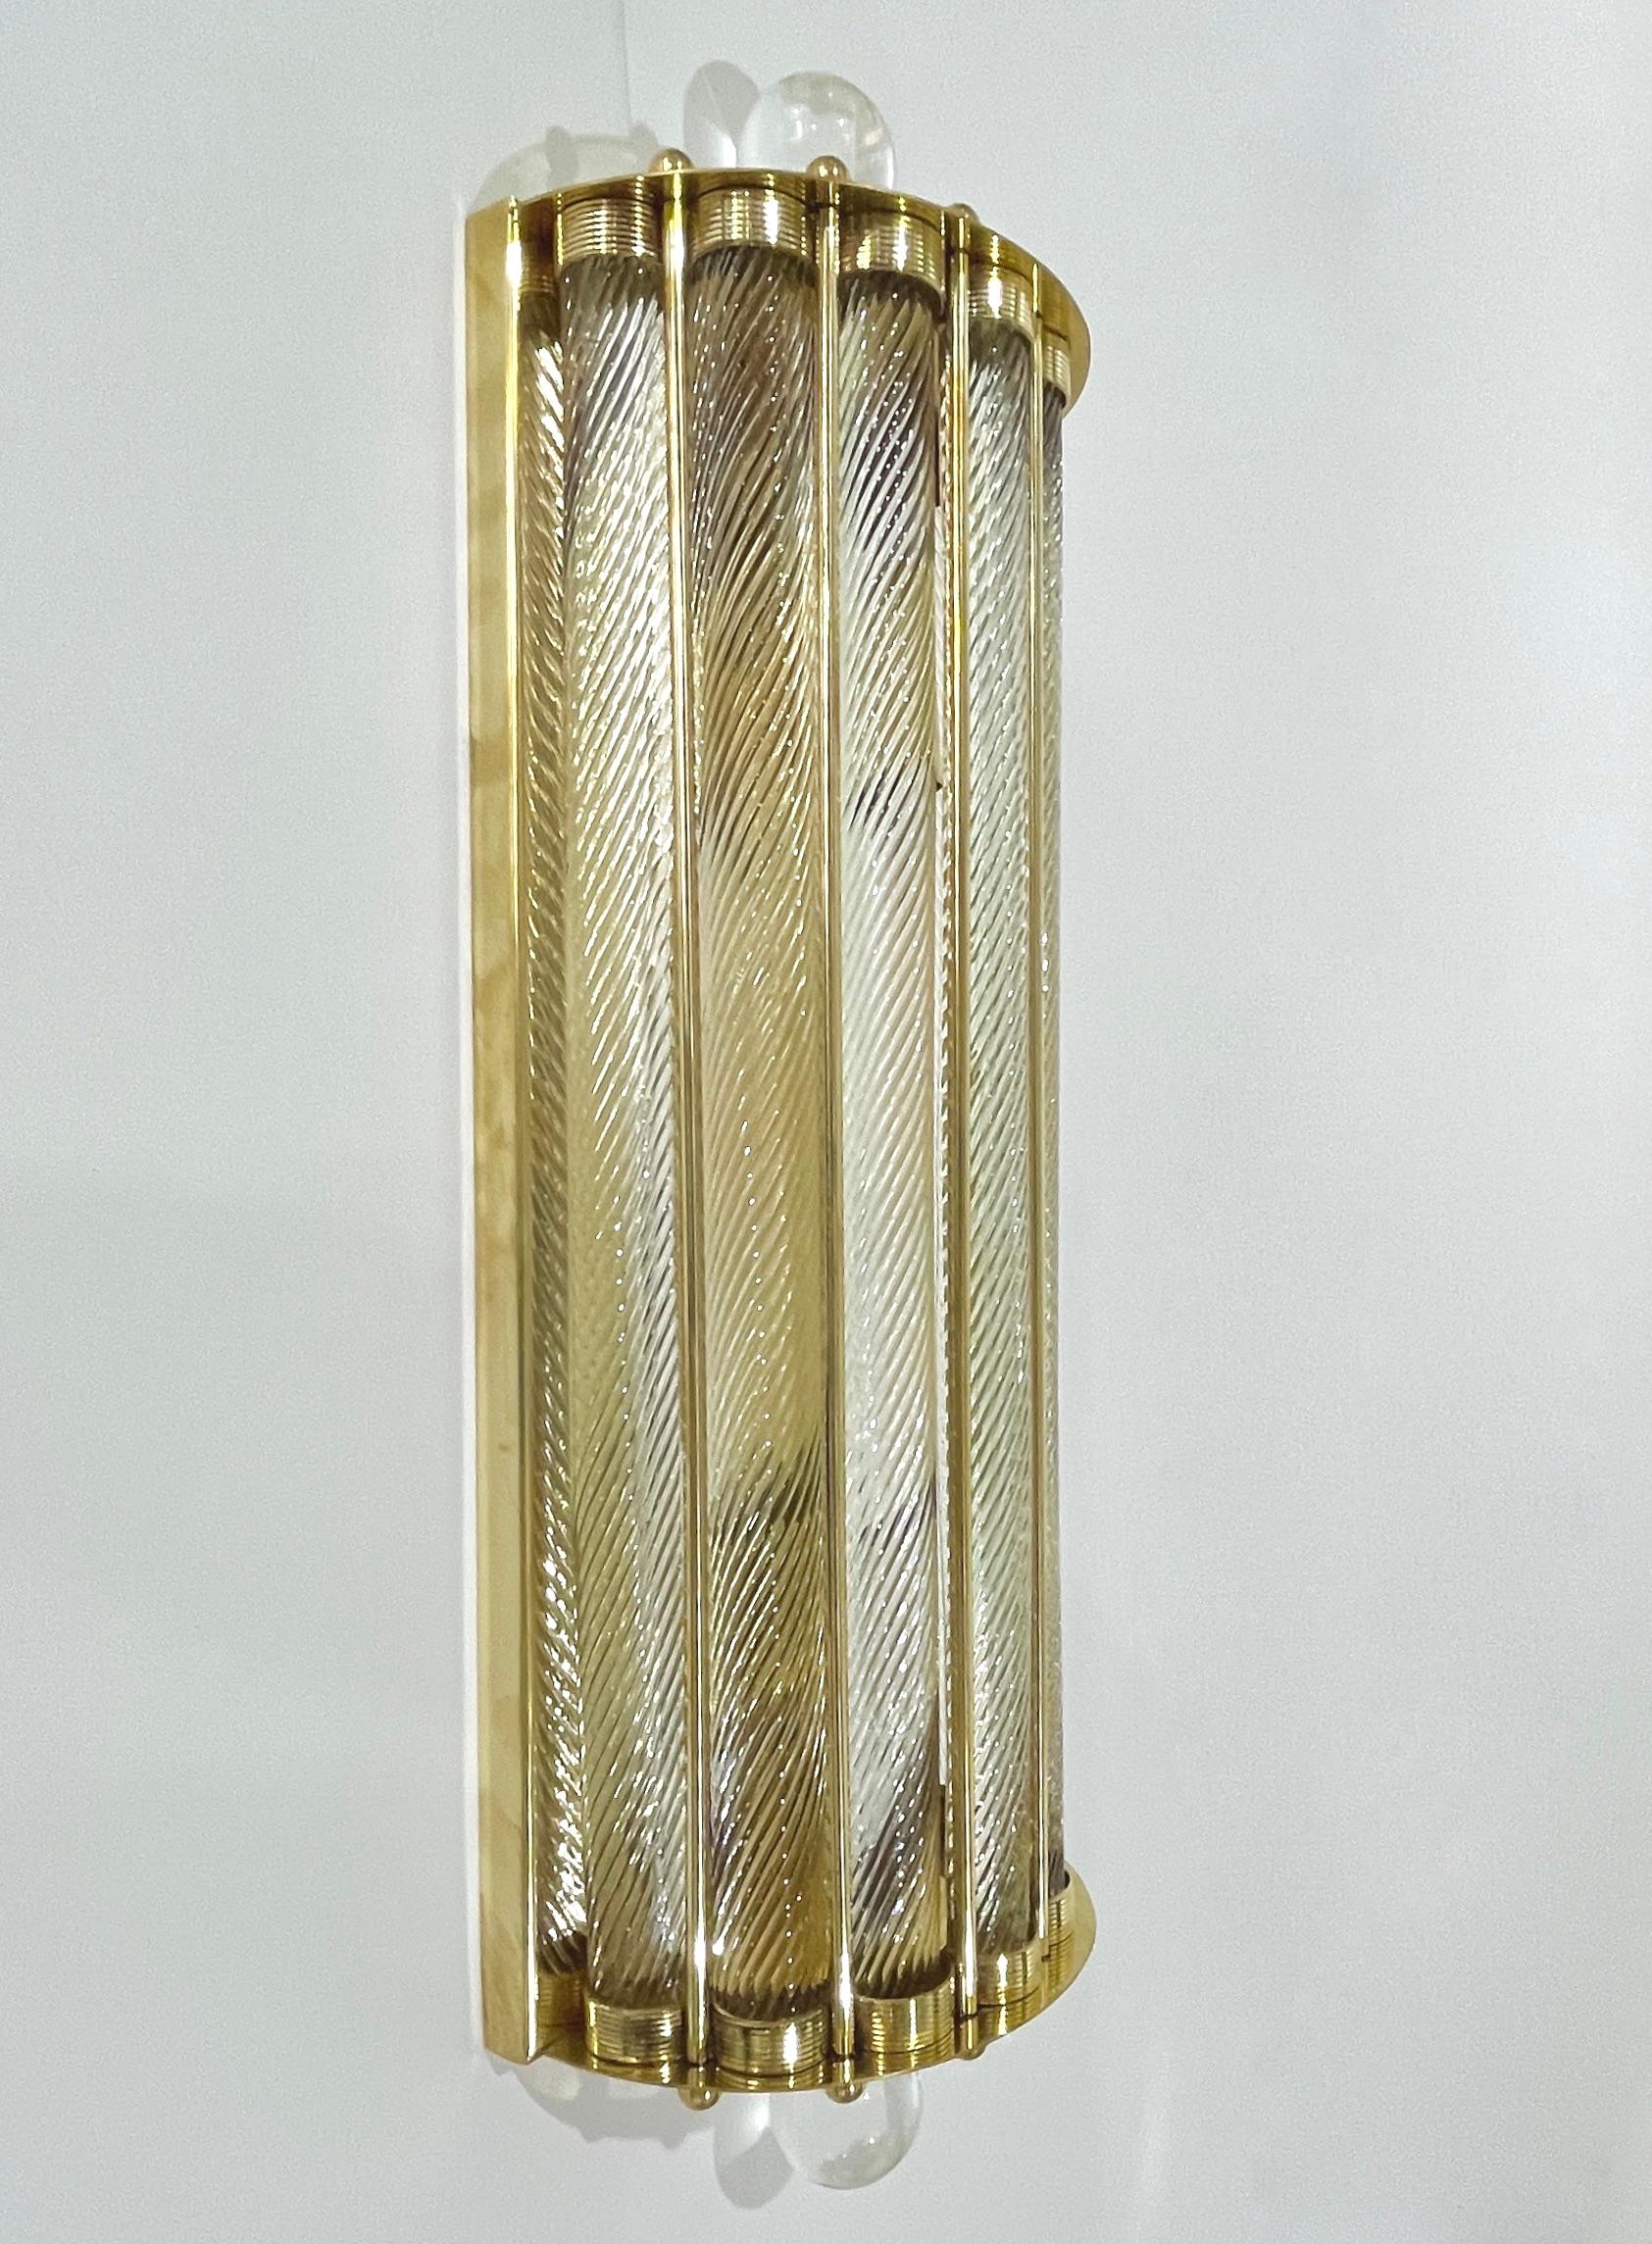 New Italian Art Deco Design Crystal Ball Murano Glass Half Moon Brass Sconces In New Condition For Sale In New York, NY